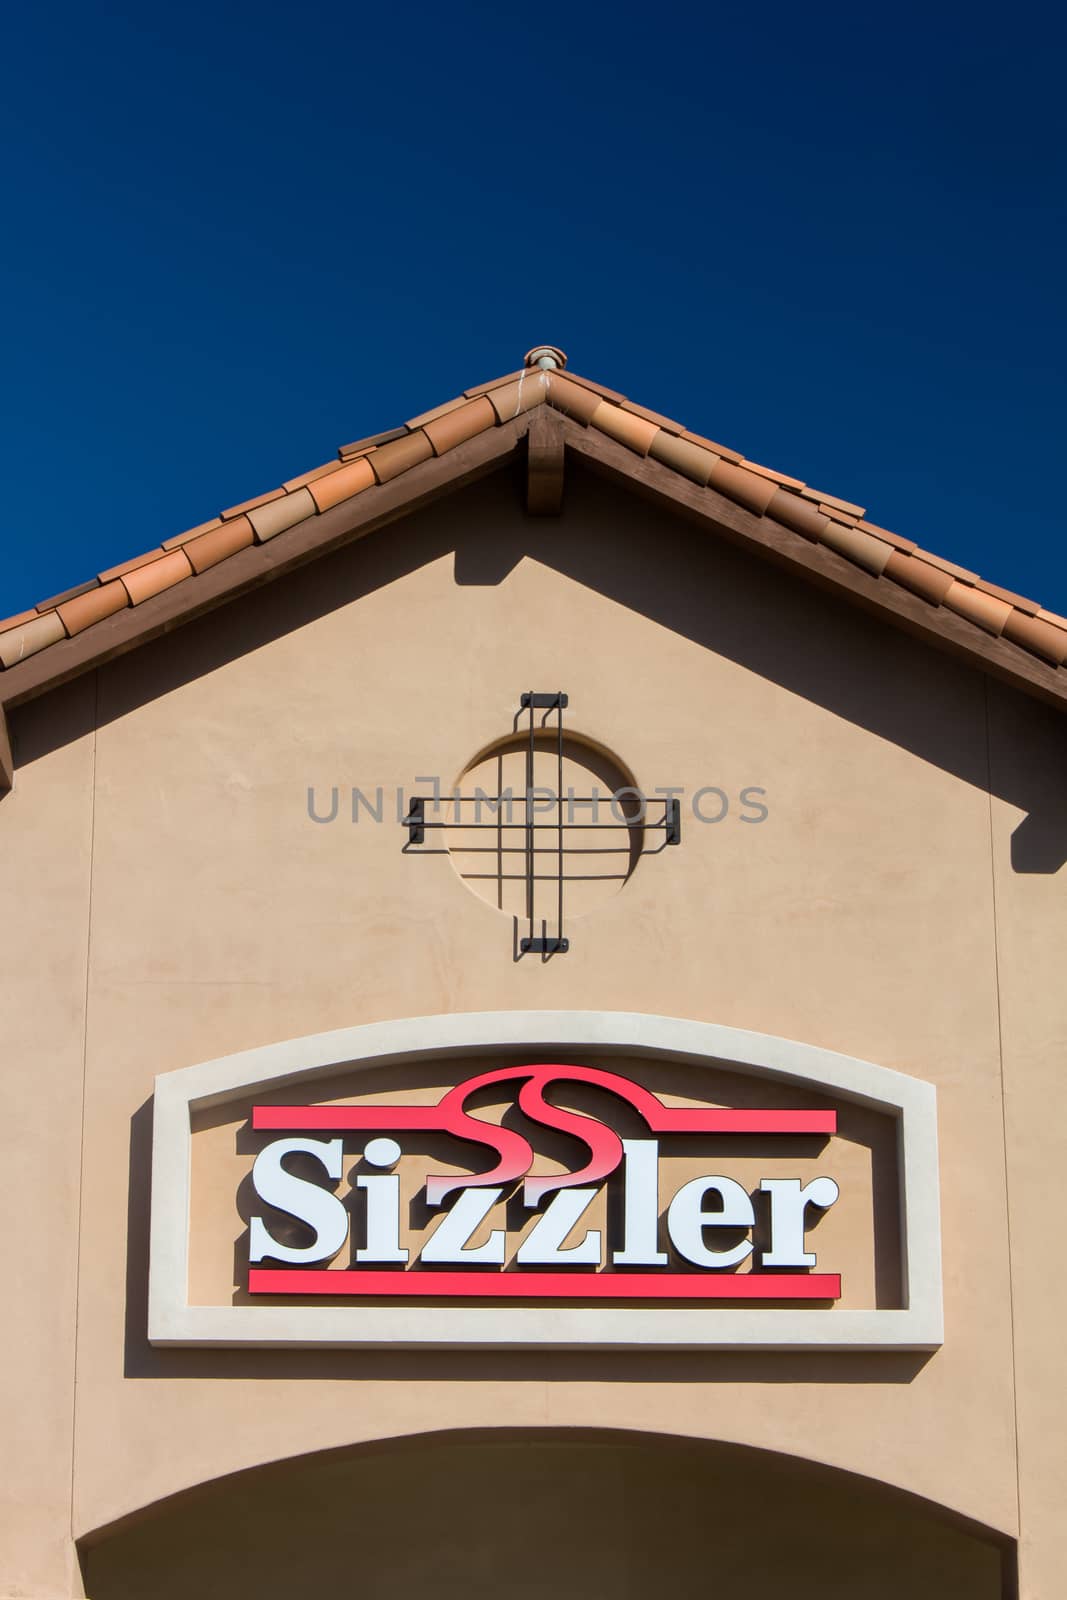 SANTA CLARITA, CA/USA - OCTOBER 1, 2014: Sizzler Restaurant exterior. Sizzler is a United States-based restaurant chain with headquarters in Mission Viejo, California.